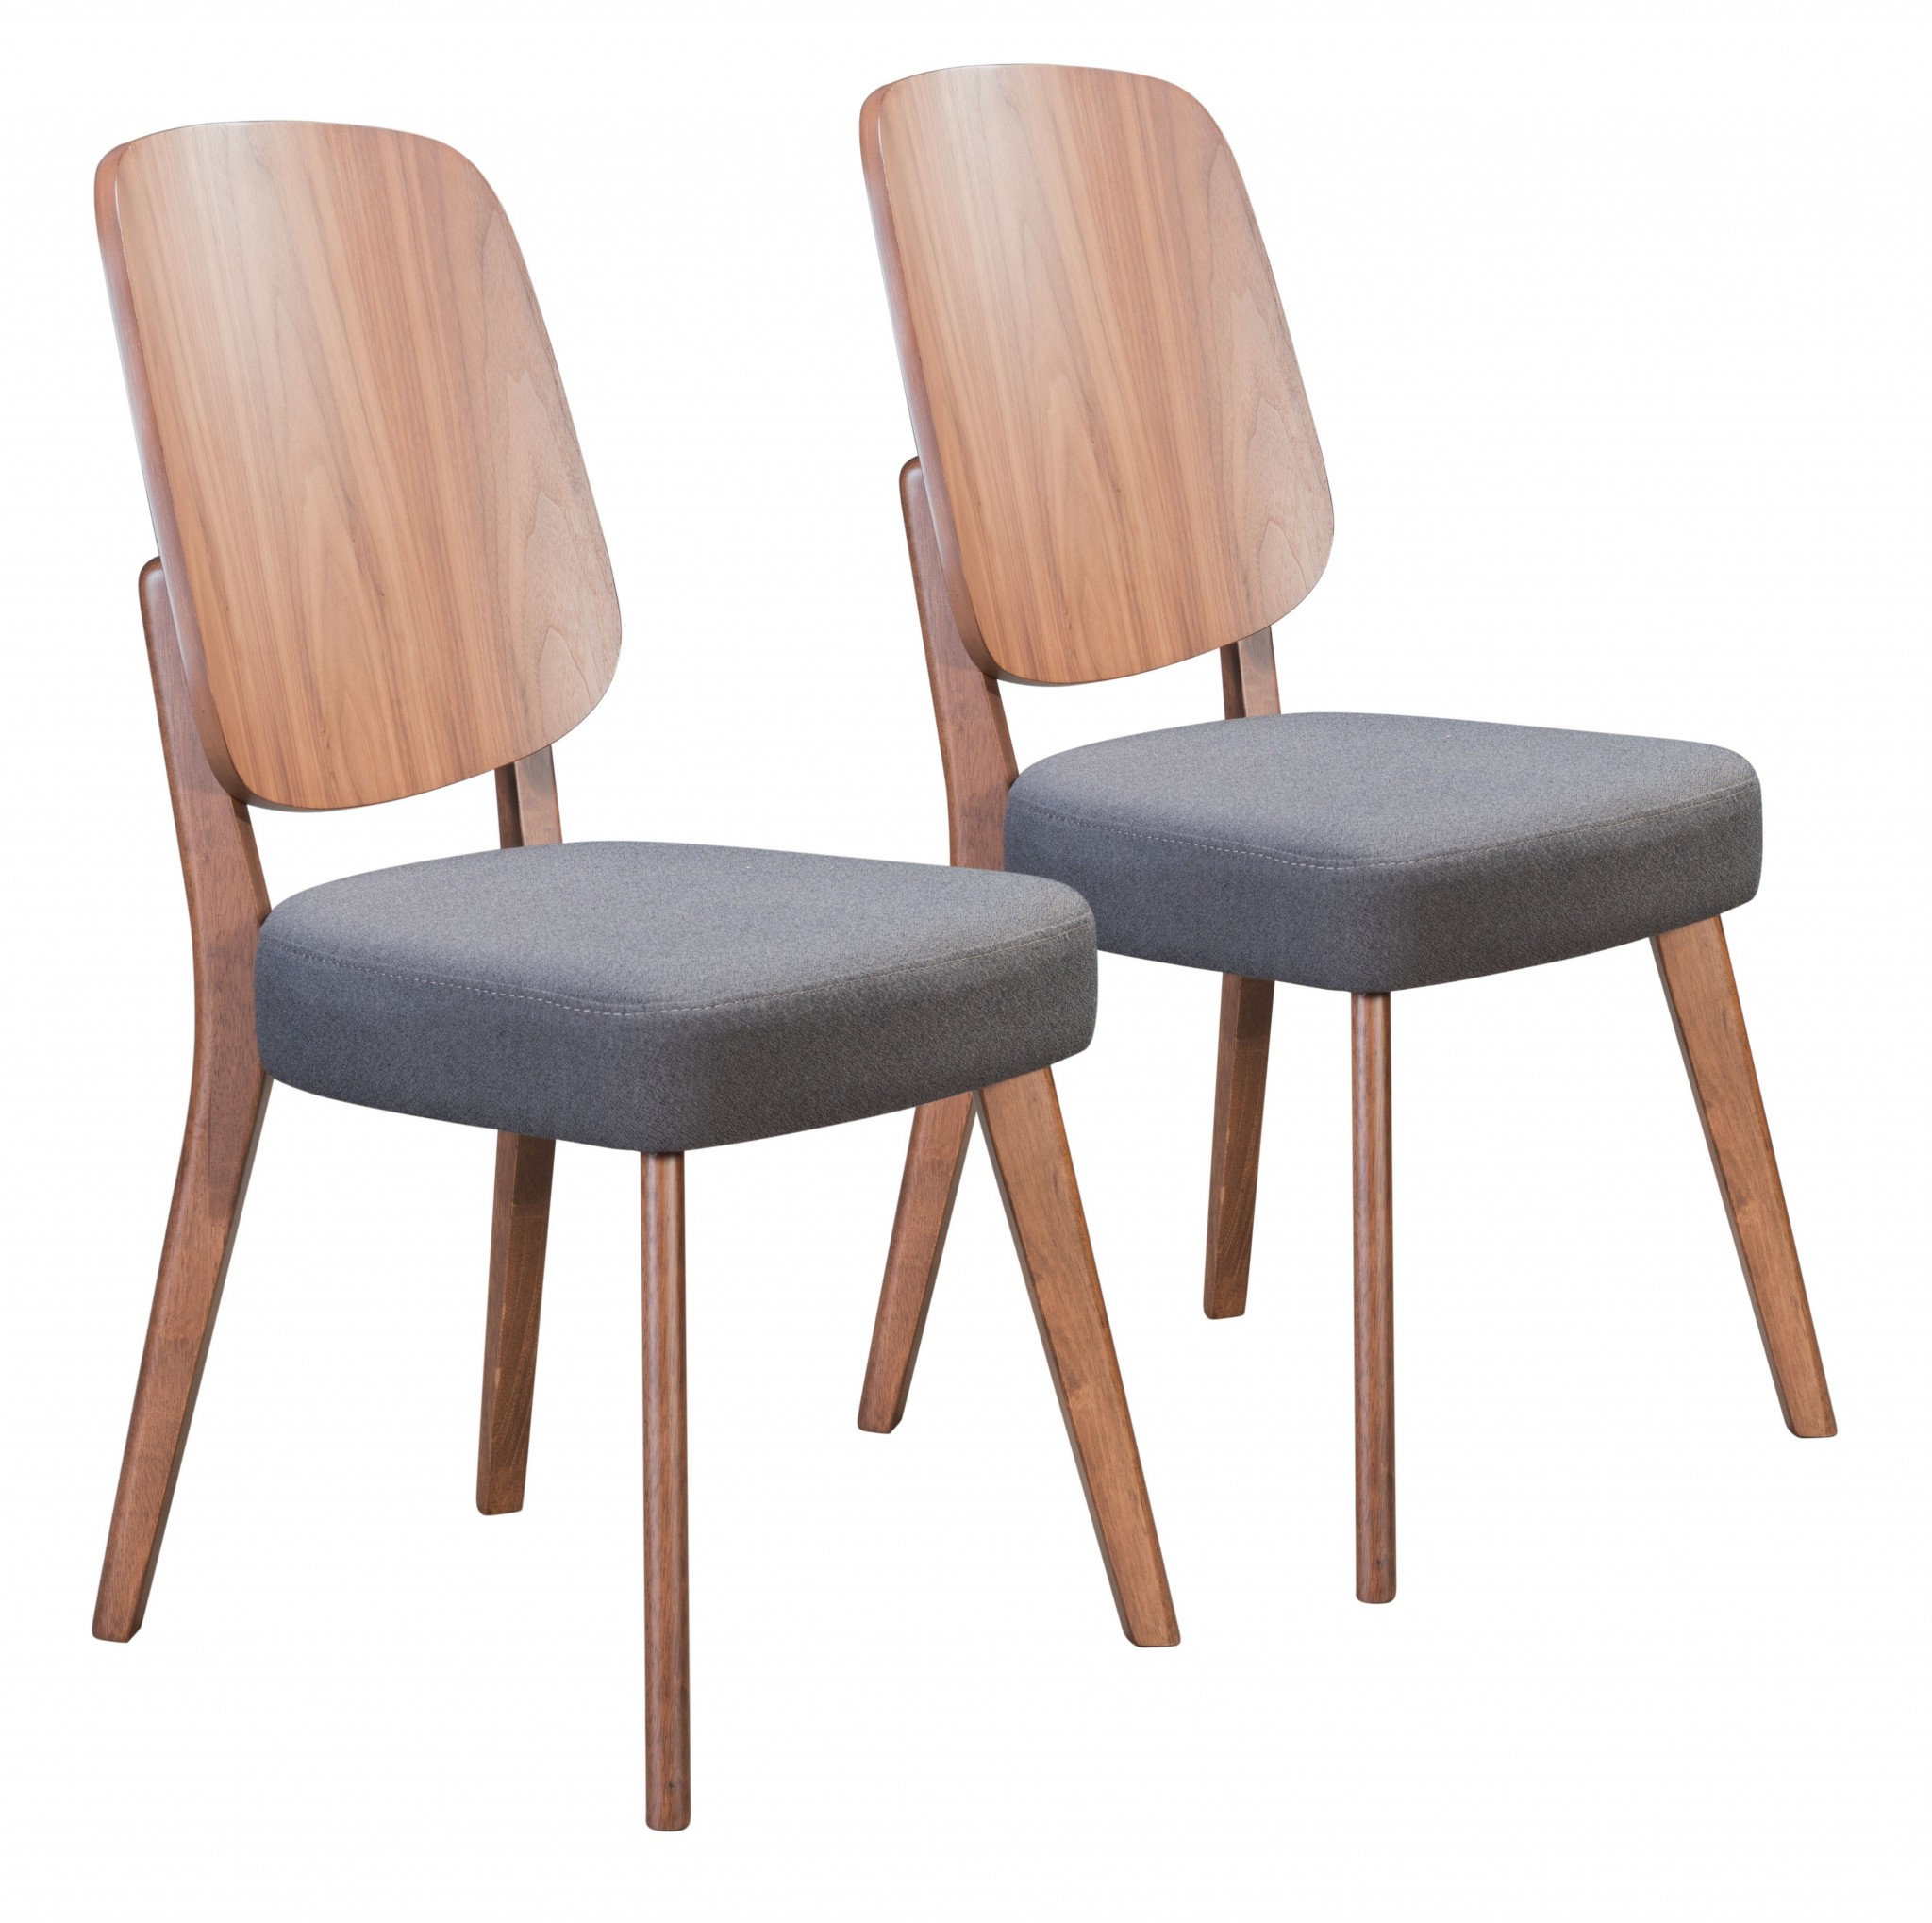 Set of Two Walnut and Dark Gray Modern Retro Dining Chairs